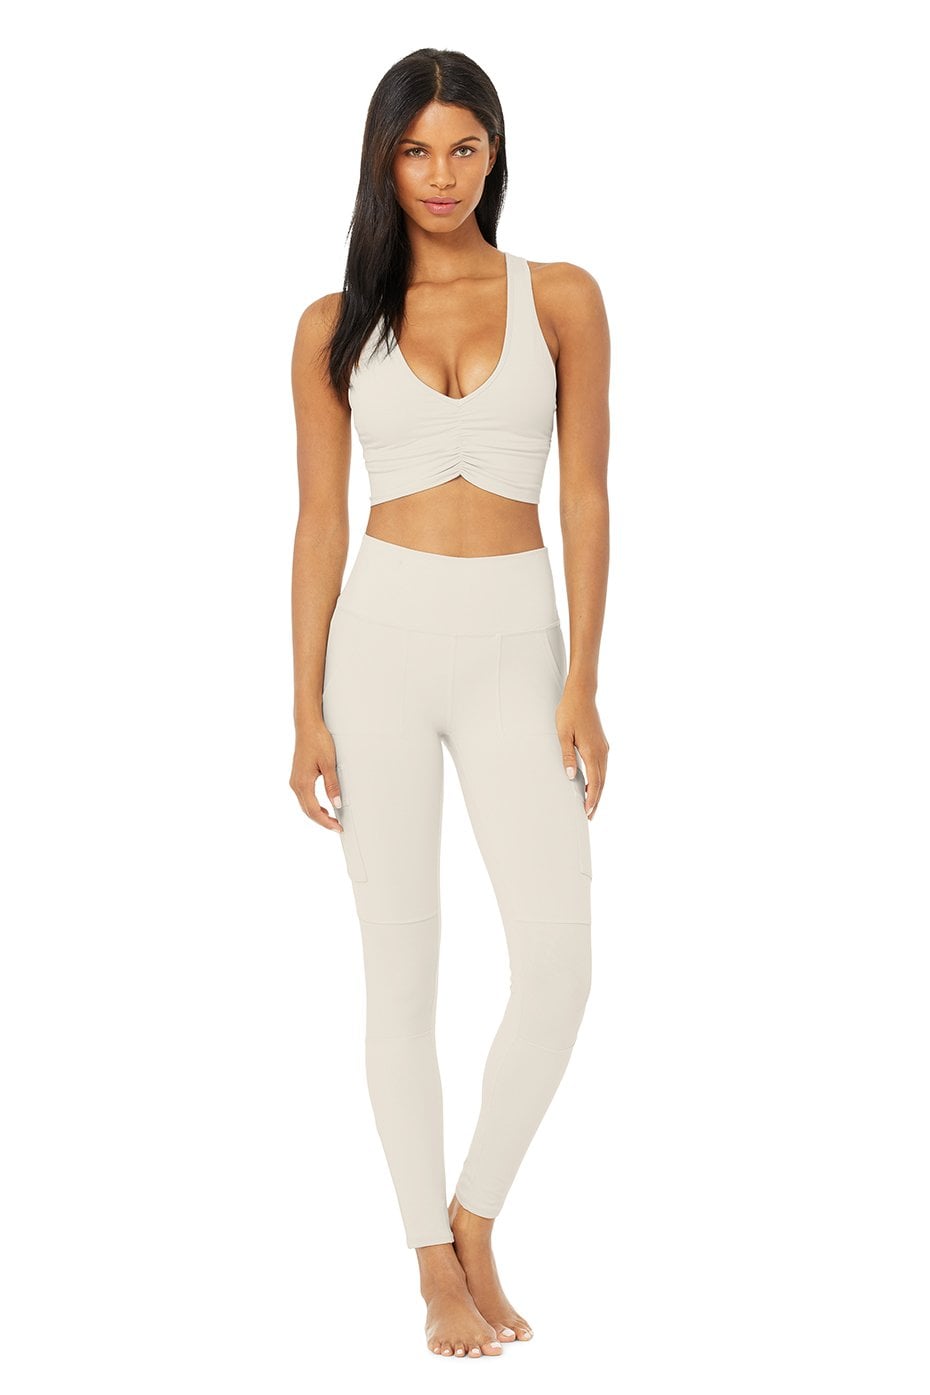 Alo Cargo Legging & Wild Thing Bra Set, Alo Has a Bunch of Cute Sets You  Can Both Work Out and Lounge In